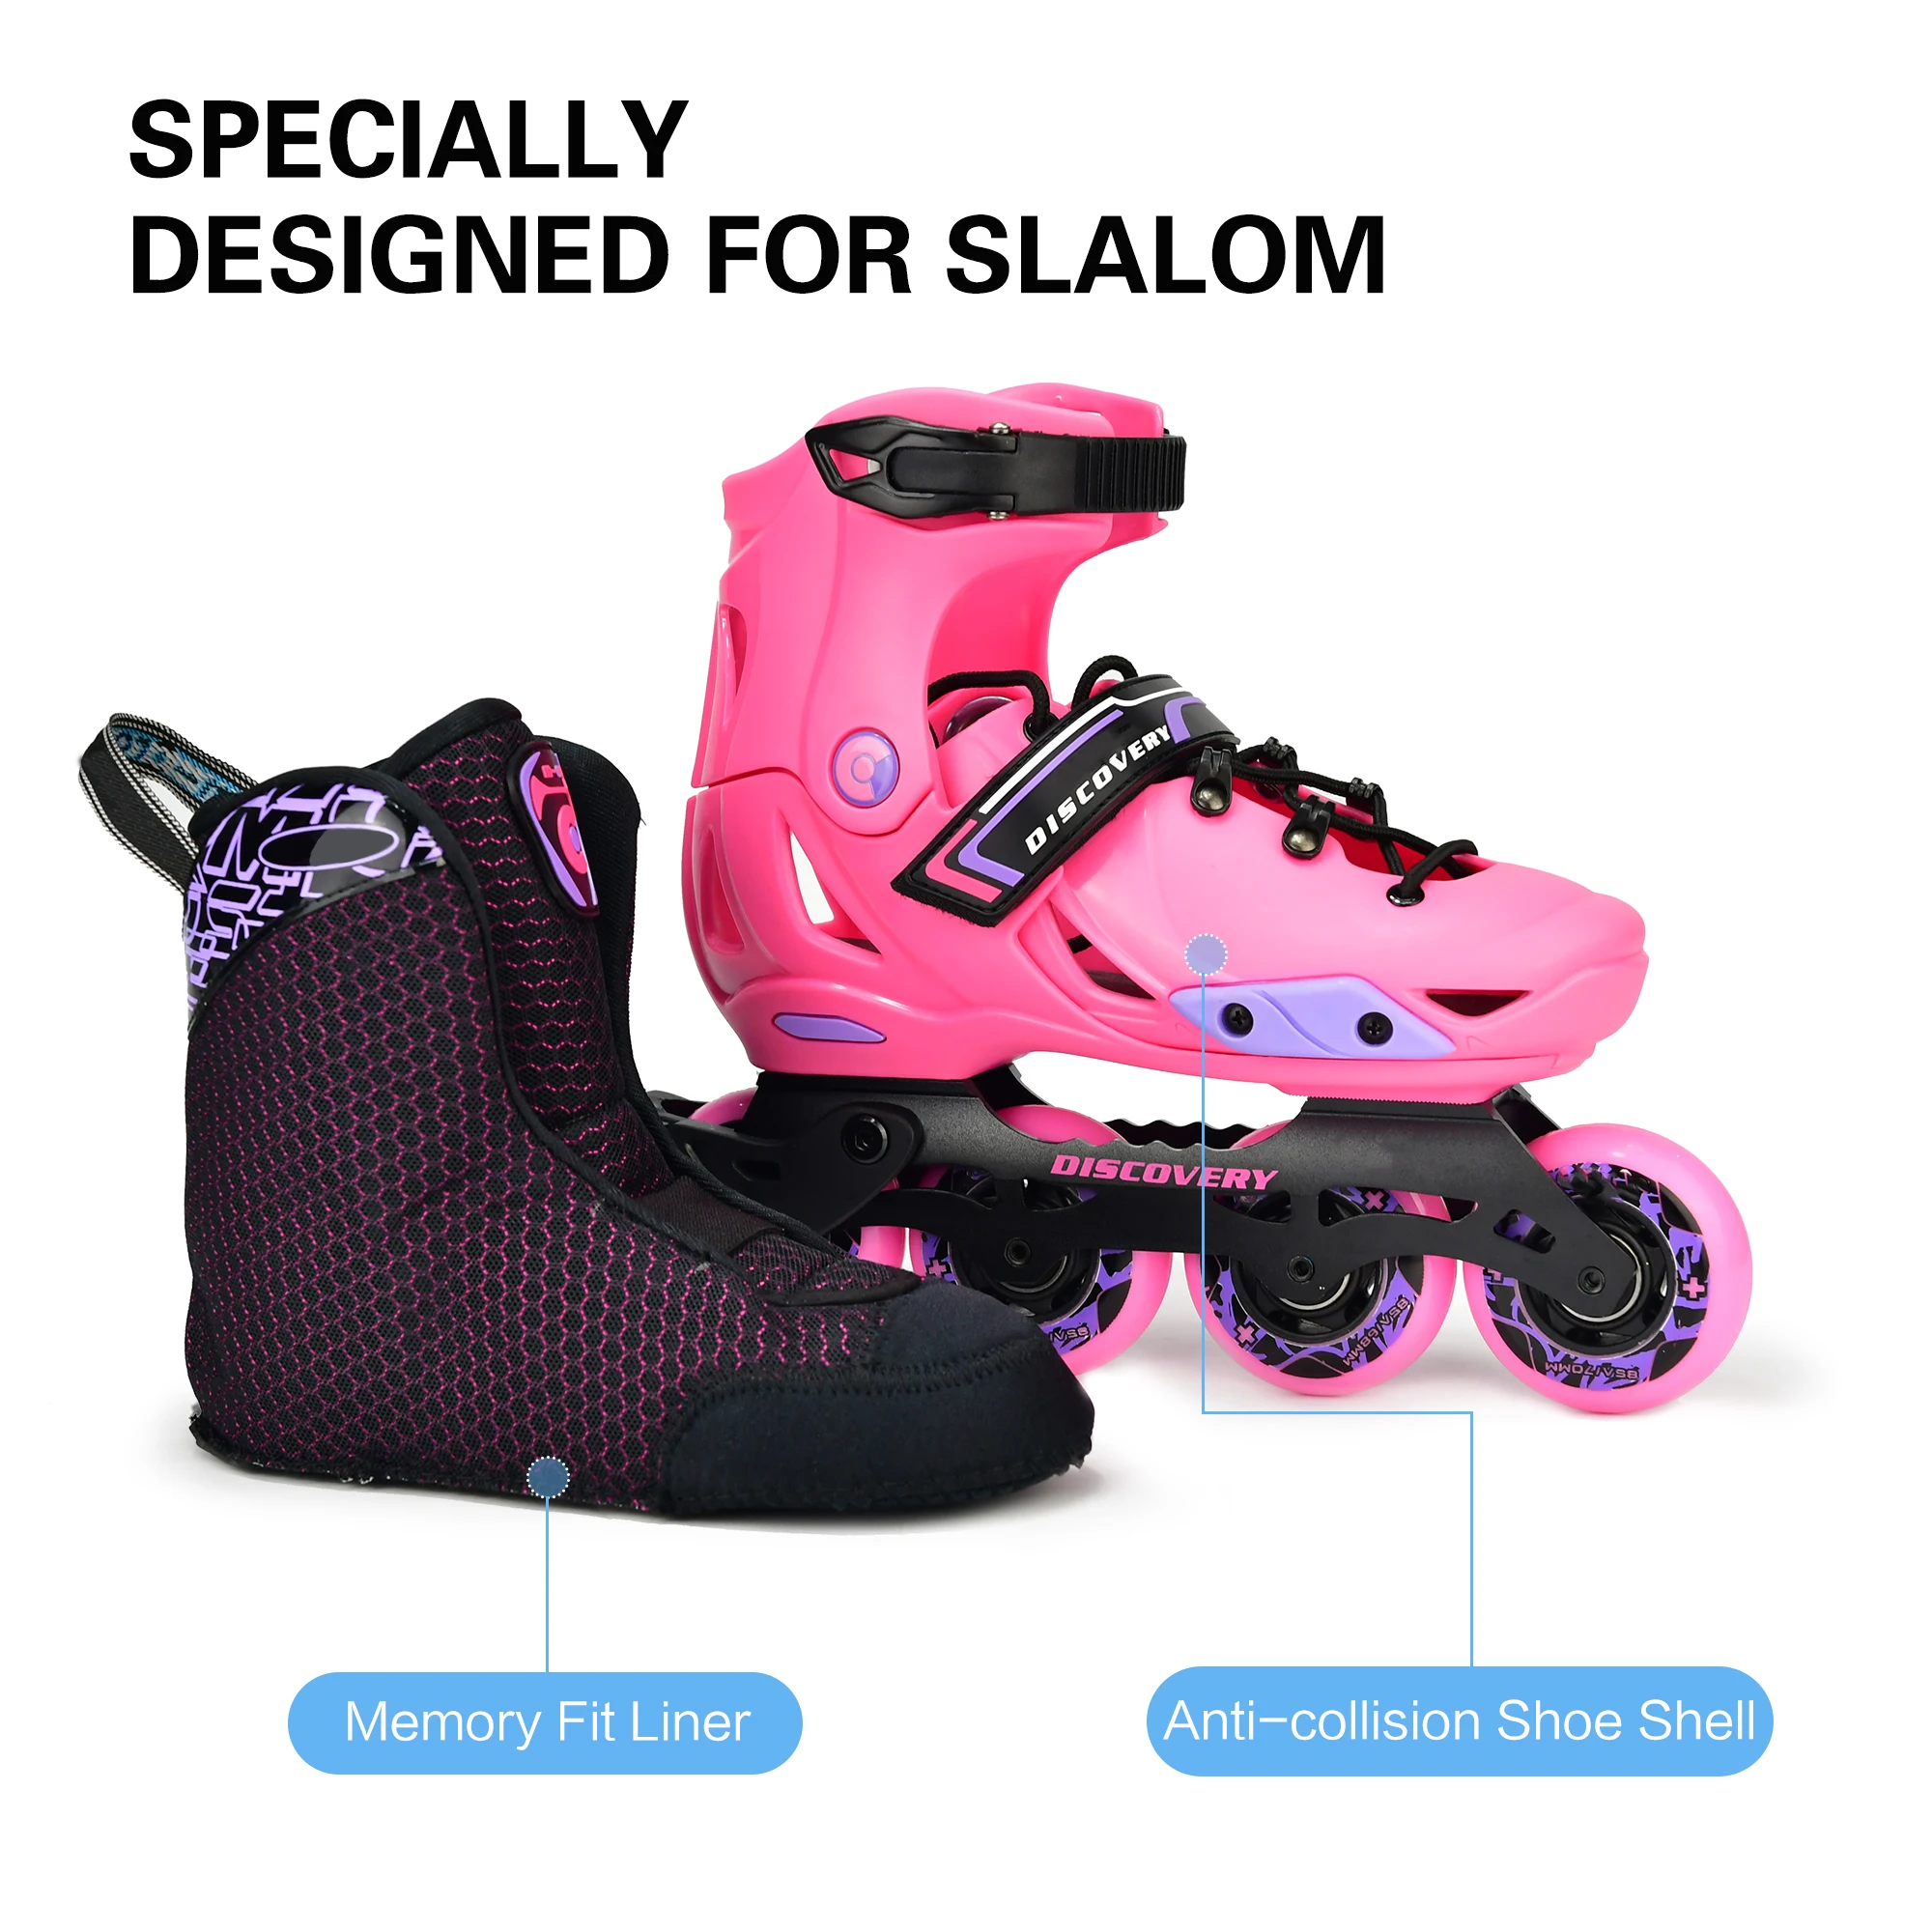 MICRO DISCOVERY ECO-Environmentally friendly Skating for Kids Slalom, Lightweight  Fast Buckle-Up